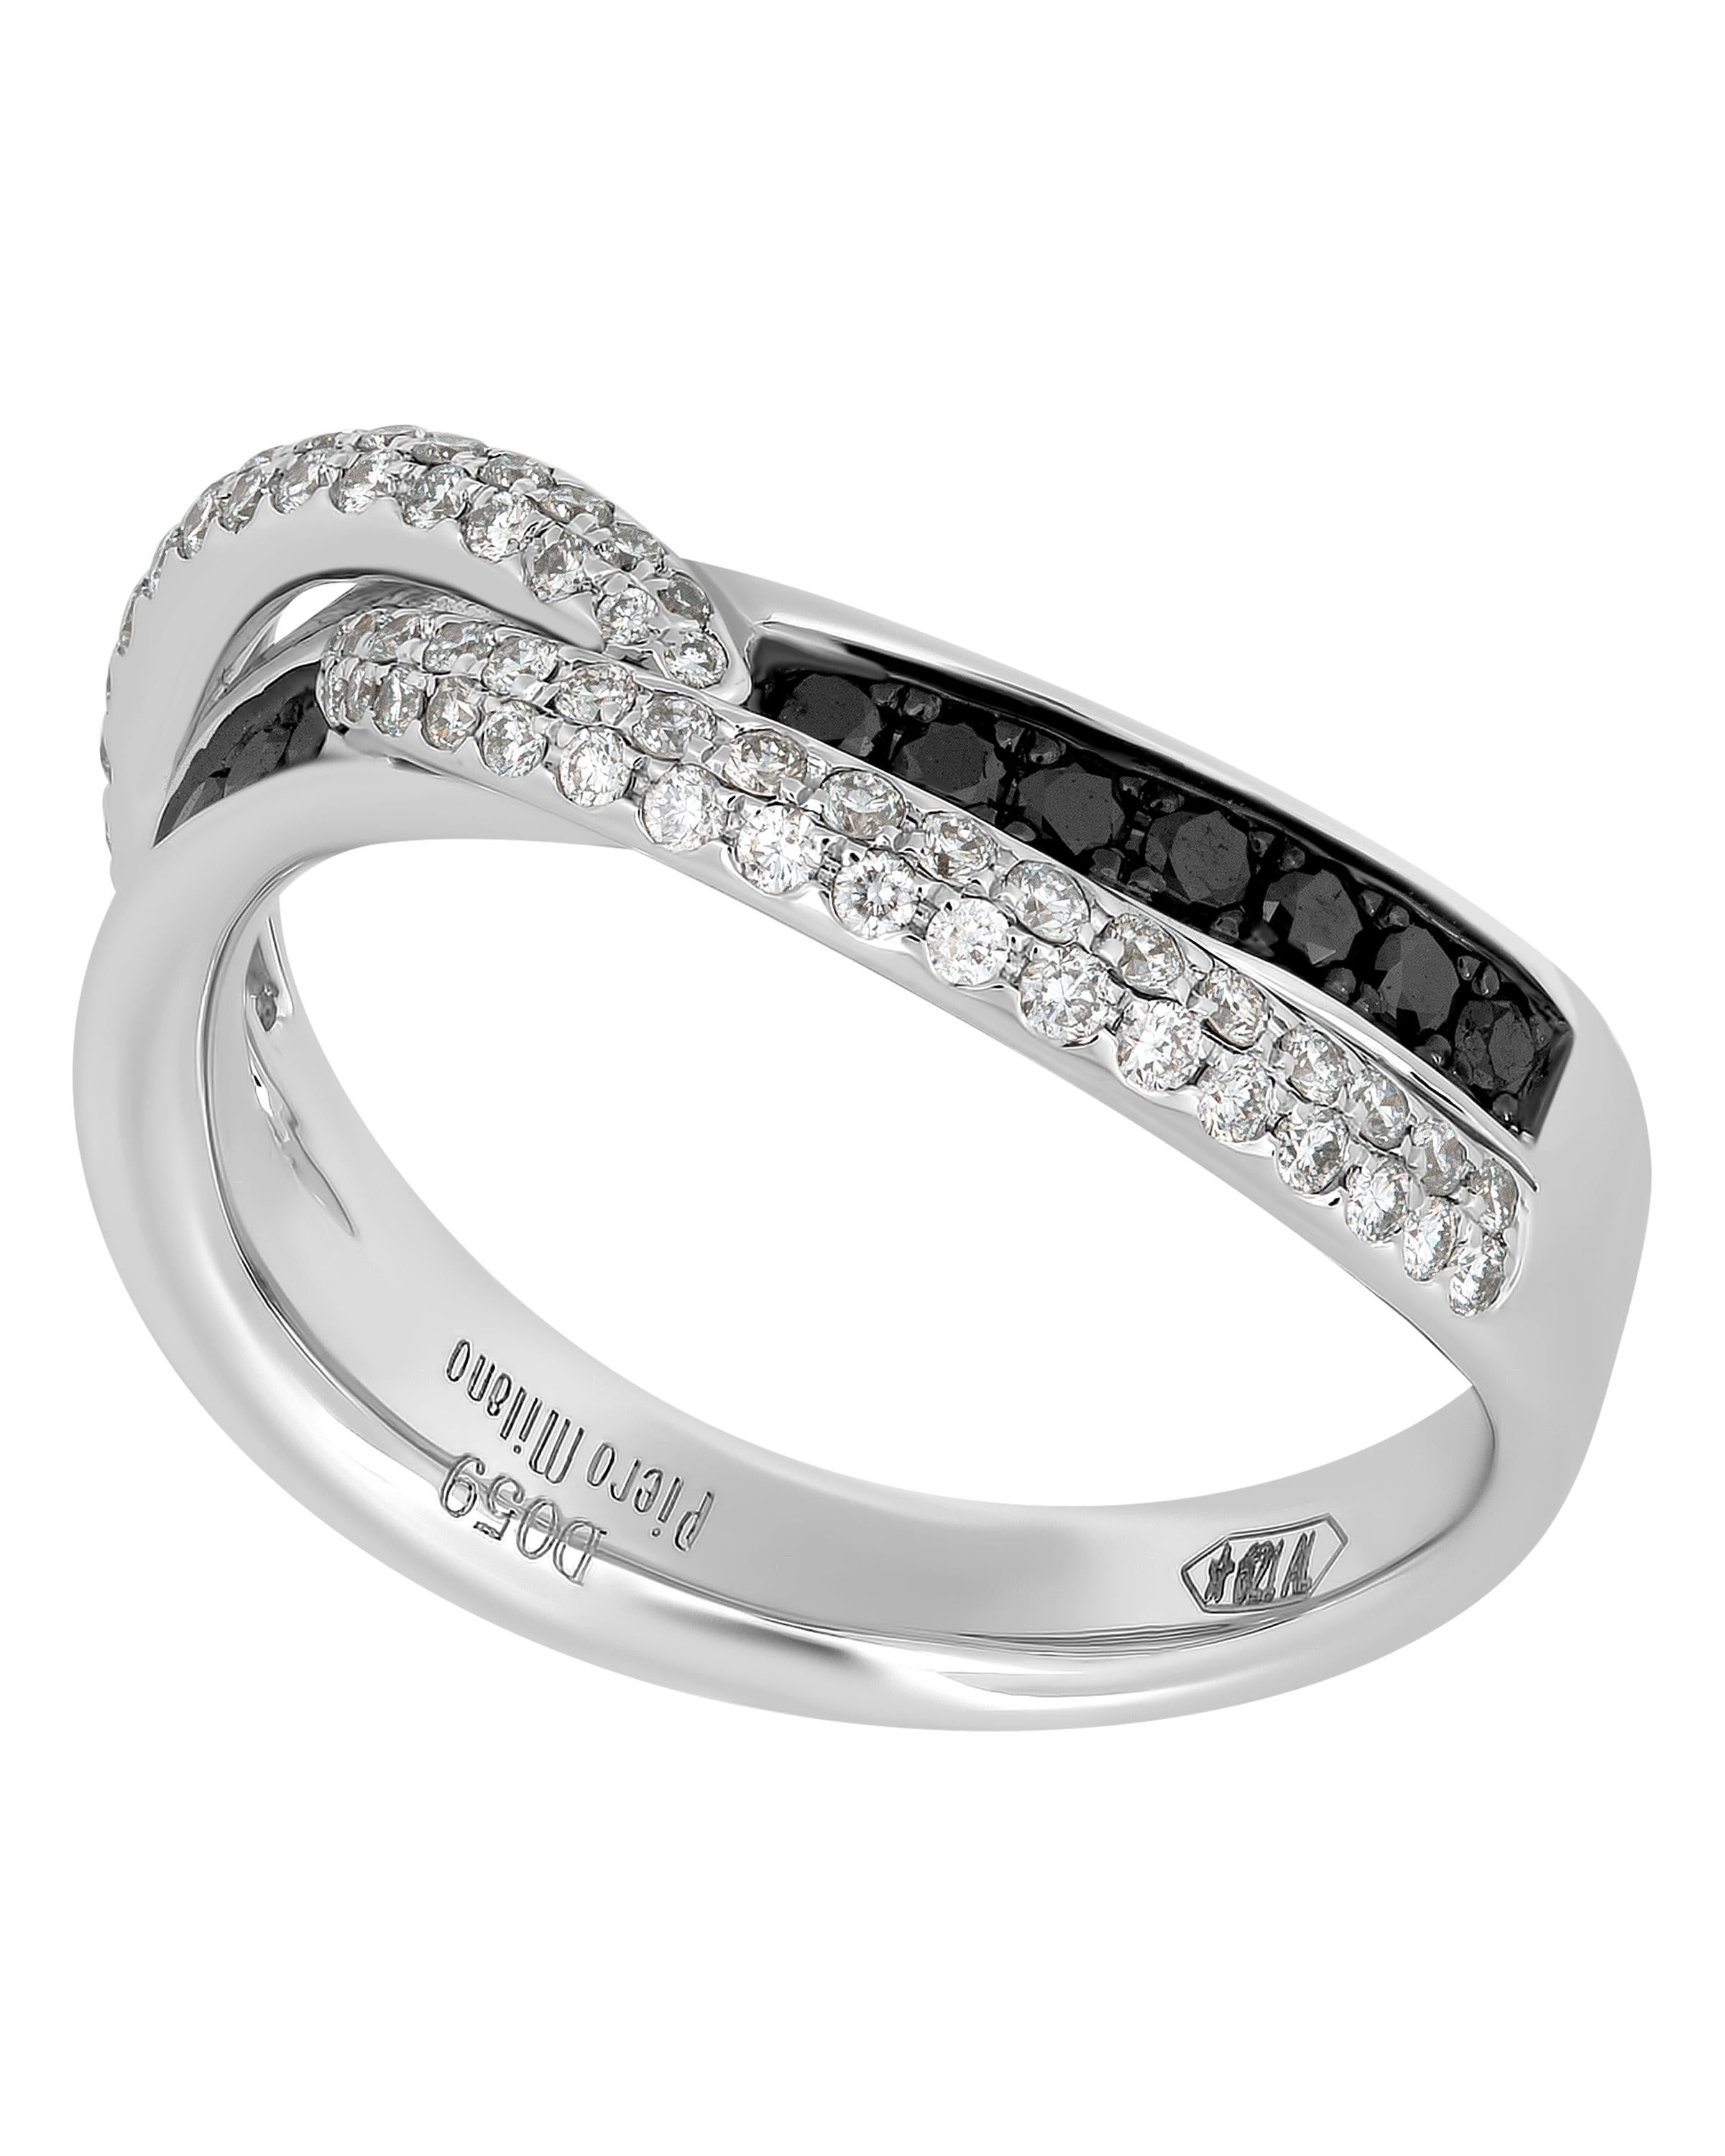 This show-stopping Piero Milano 18K White Gold Crossover Ring features glistening channels of black diamonds (0.24ct twd) elevated with two arches of shimmering white diamonds (0.35ct twd) intertwining at the center. The ring size is 6.75 (53.8).